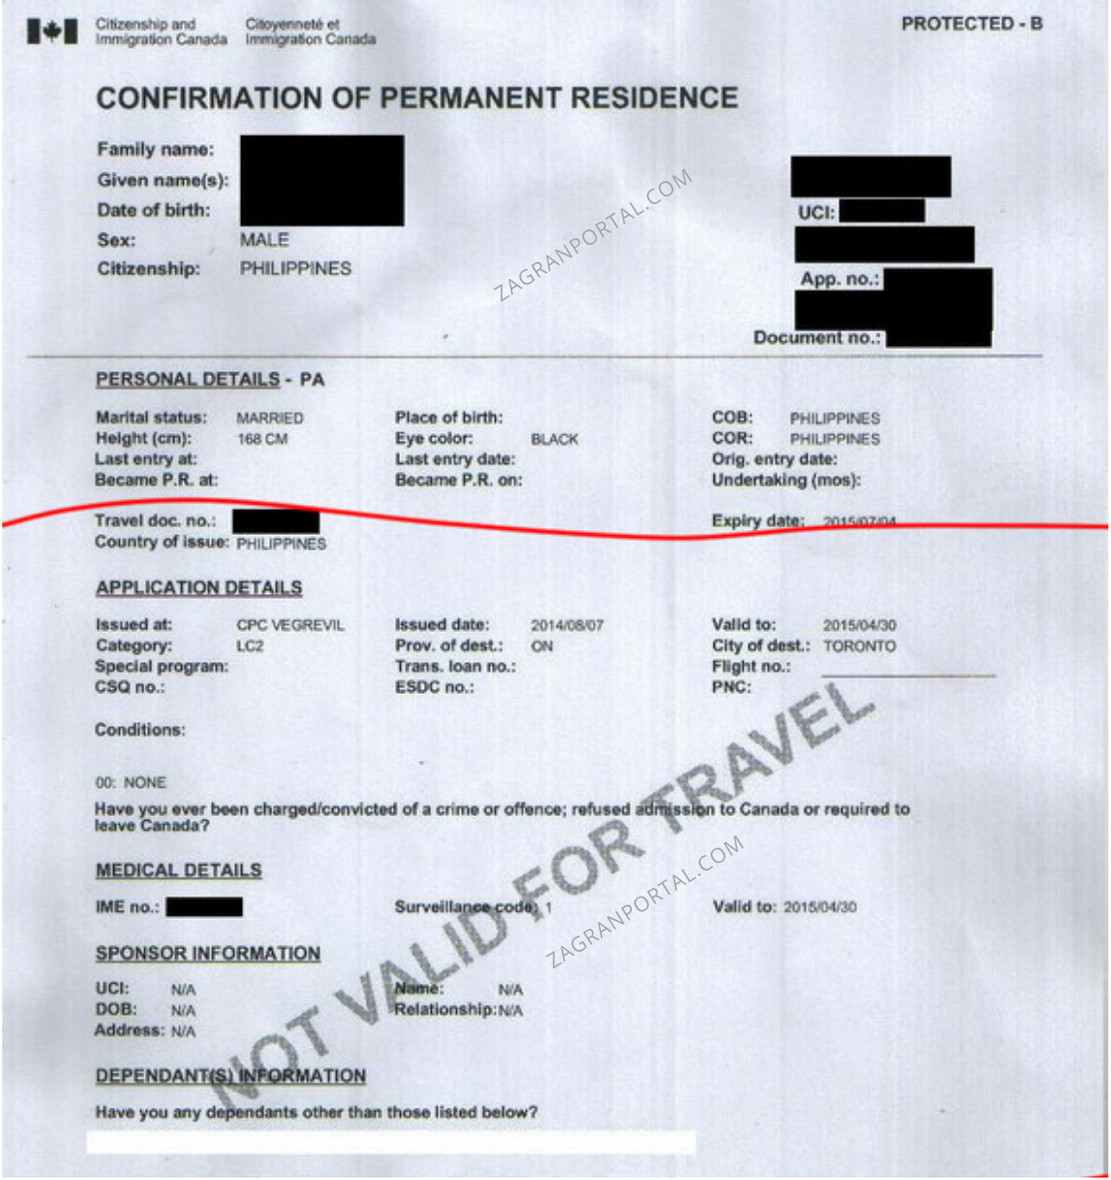 Confirmation of Permanent Residence